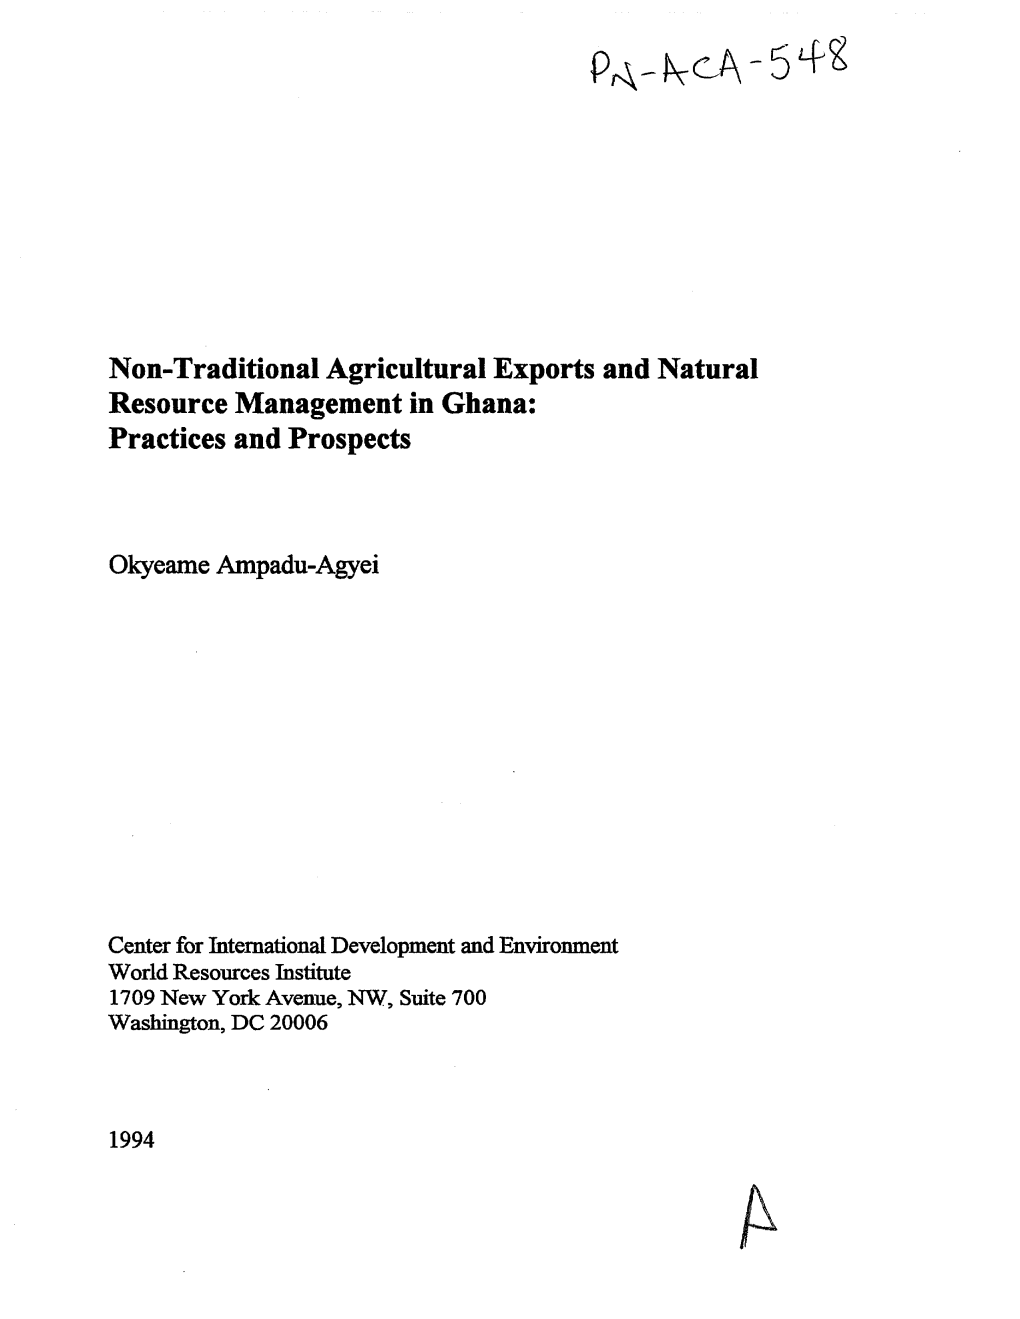 Non-Traditional Agricultural Exports and Natural Resource Management in Ghana: Practices and Prospects